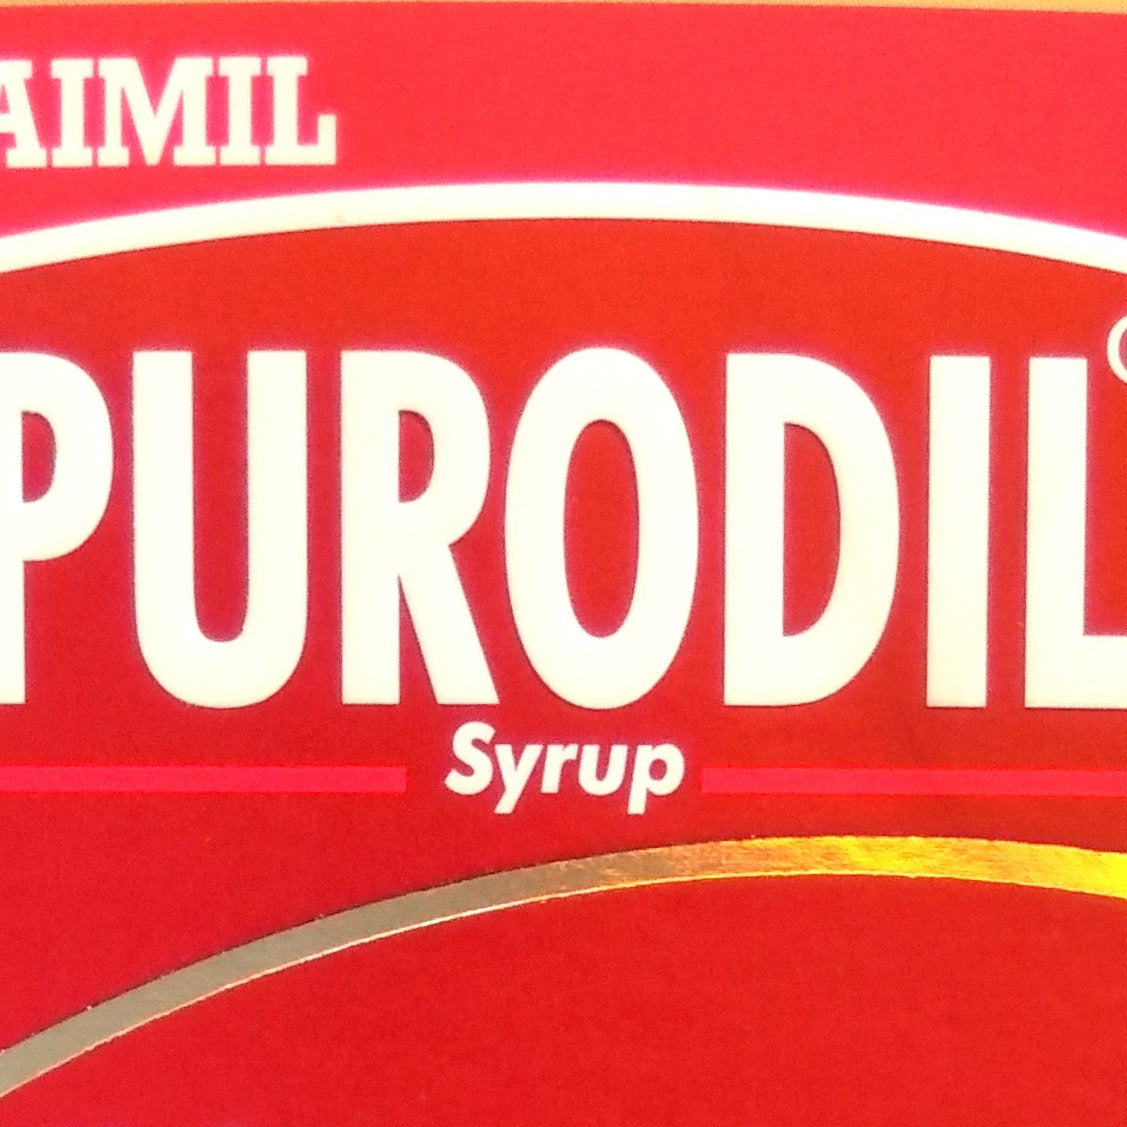 Shop Purodil Syrup 200ml at price 248.00 from Aimil Online - Ayush Care